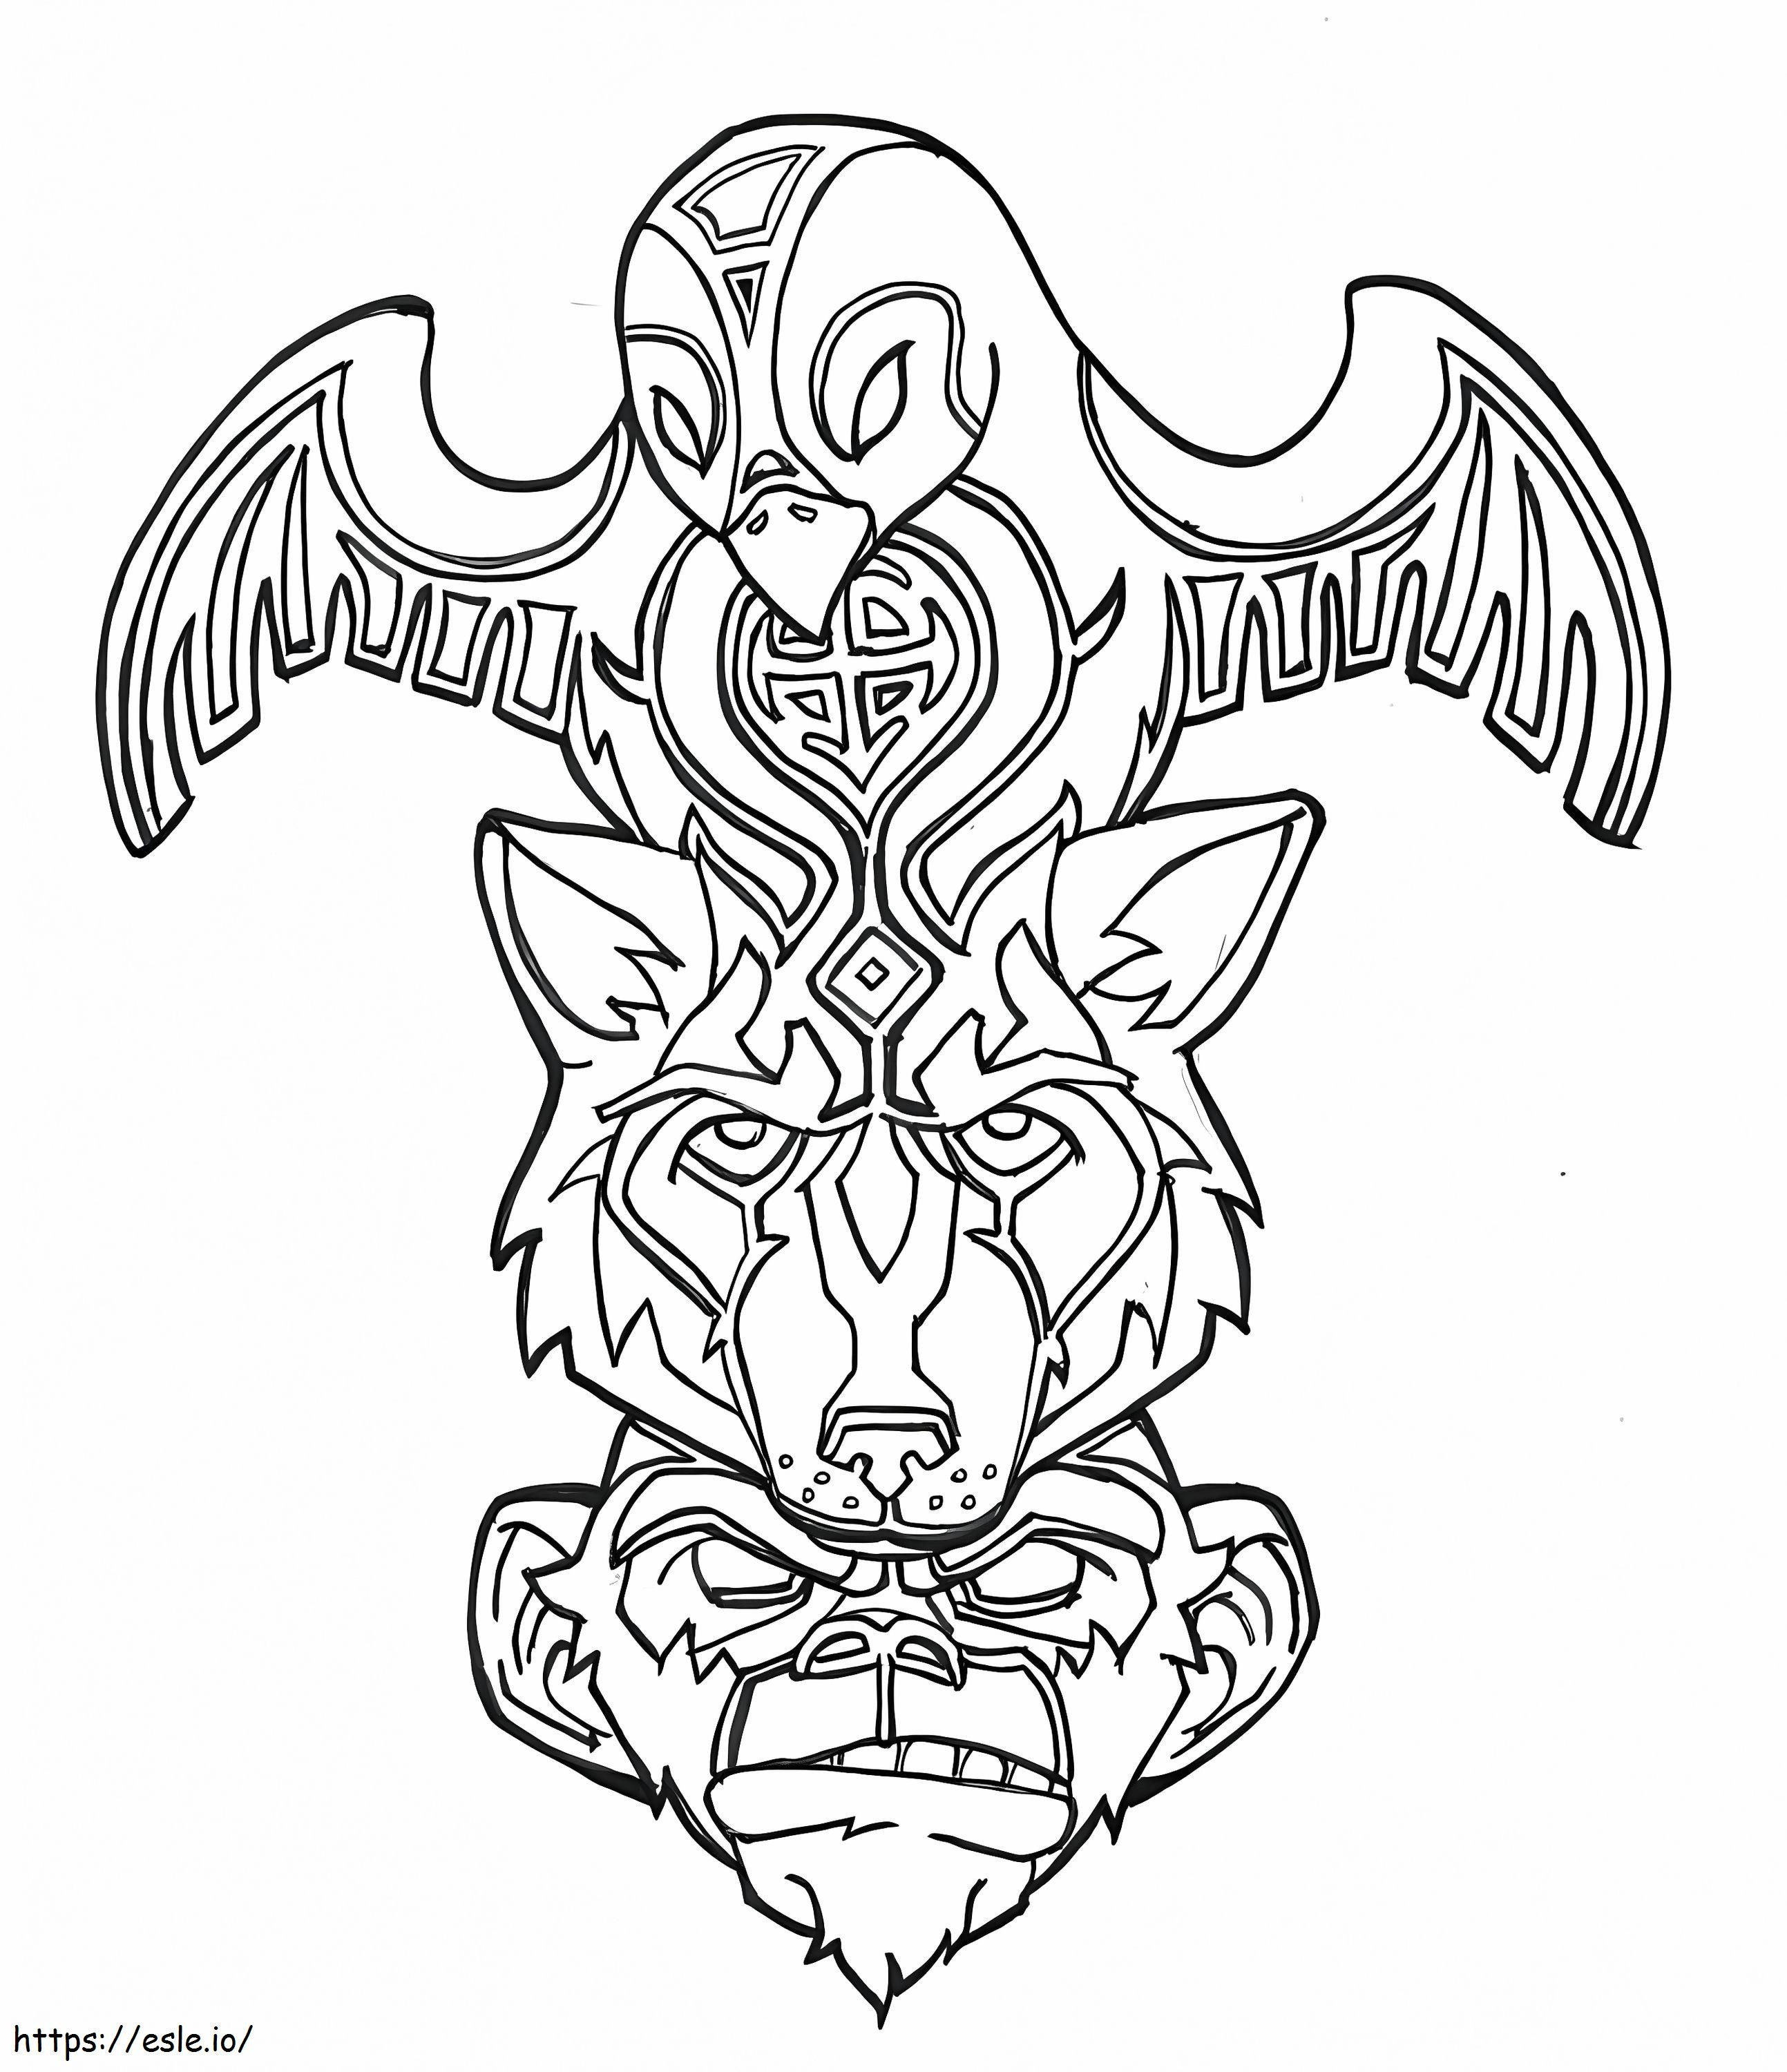 Ward Field 17 coloring page